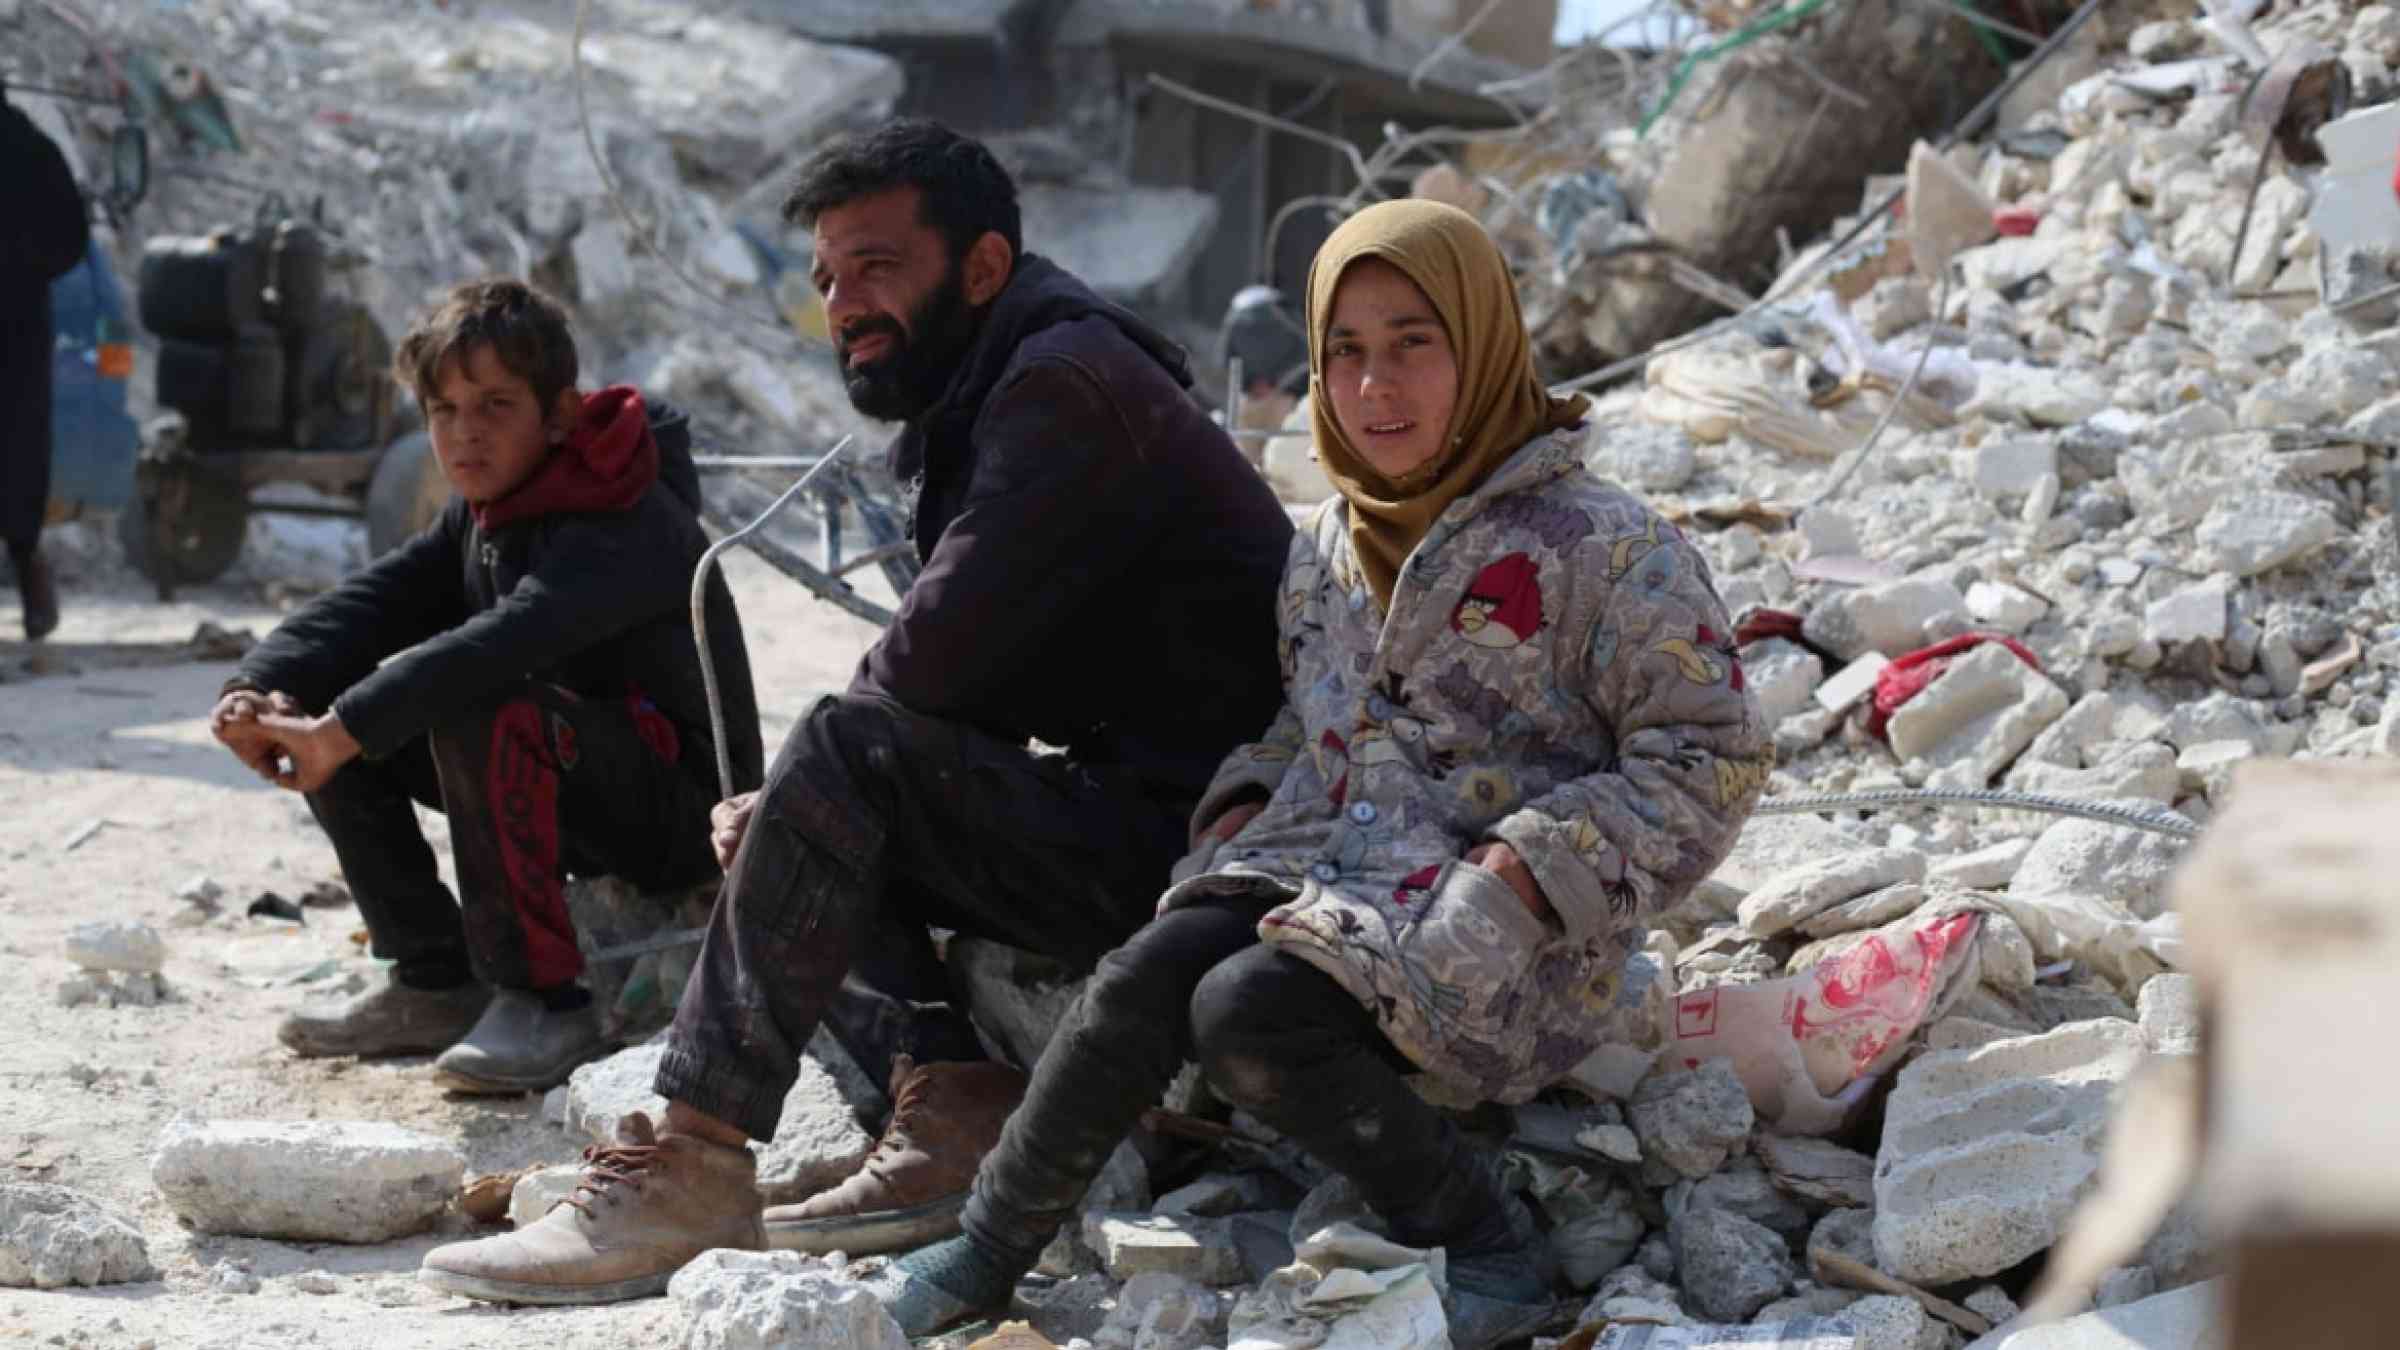 Three Syrian people sitting on the rubble in Aleppo after the earthquakes struck in 2023.